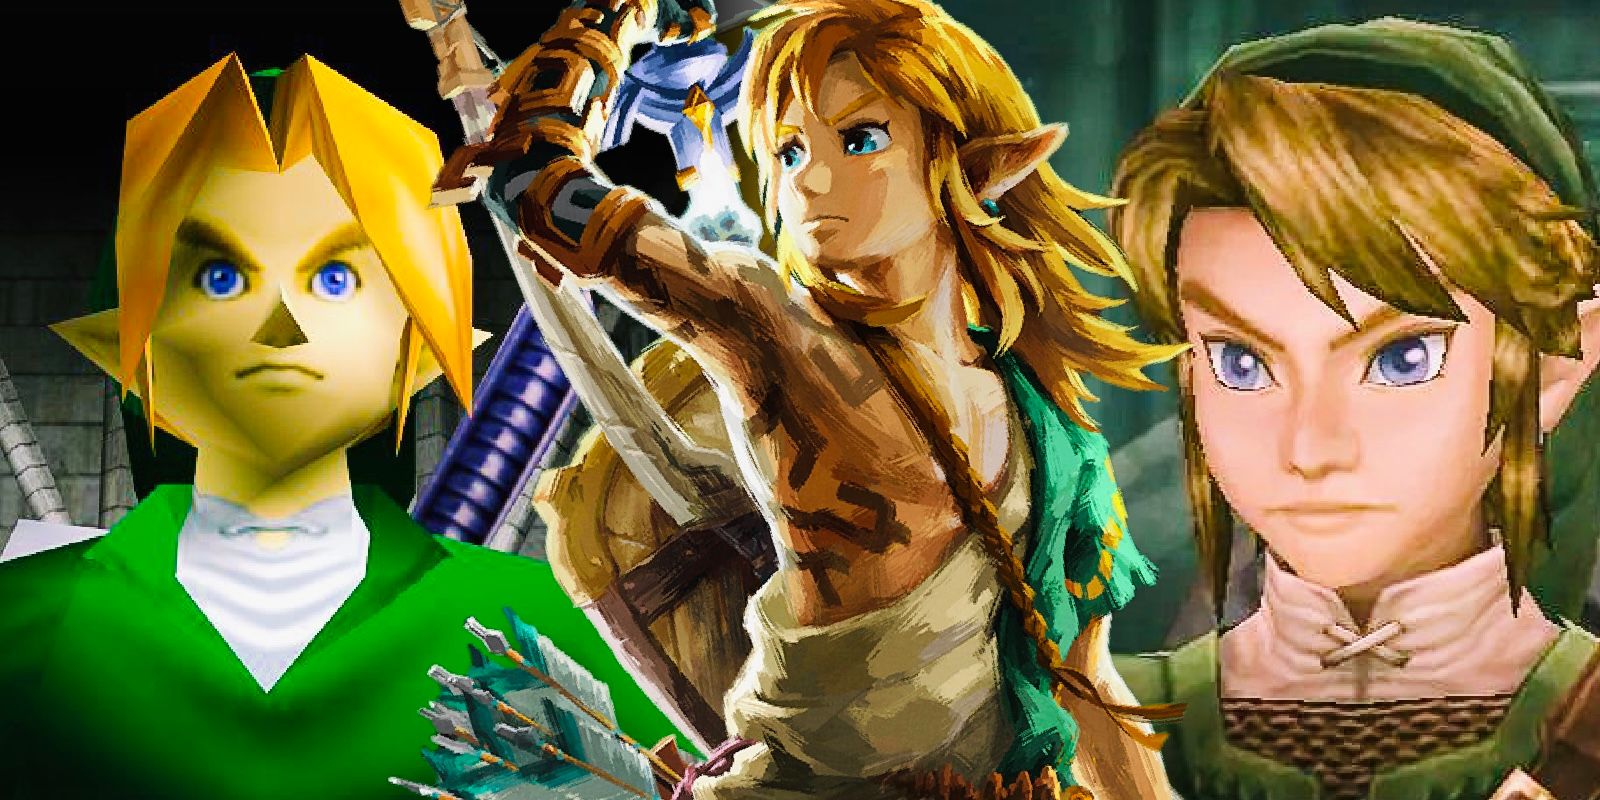 Legend Of Zelda: Every Game In The Series